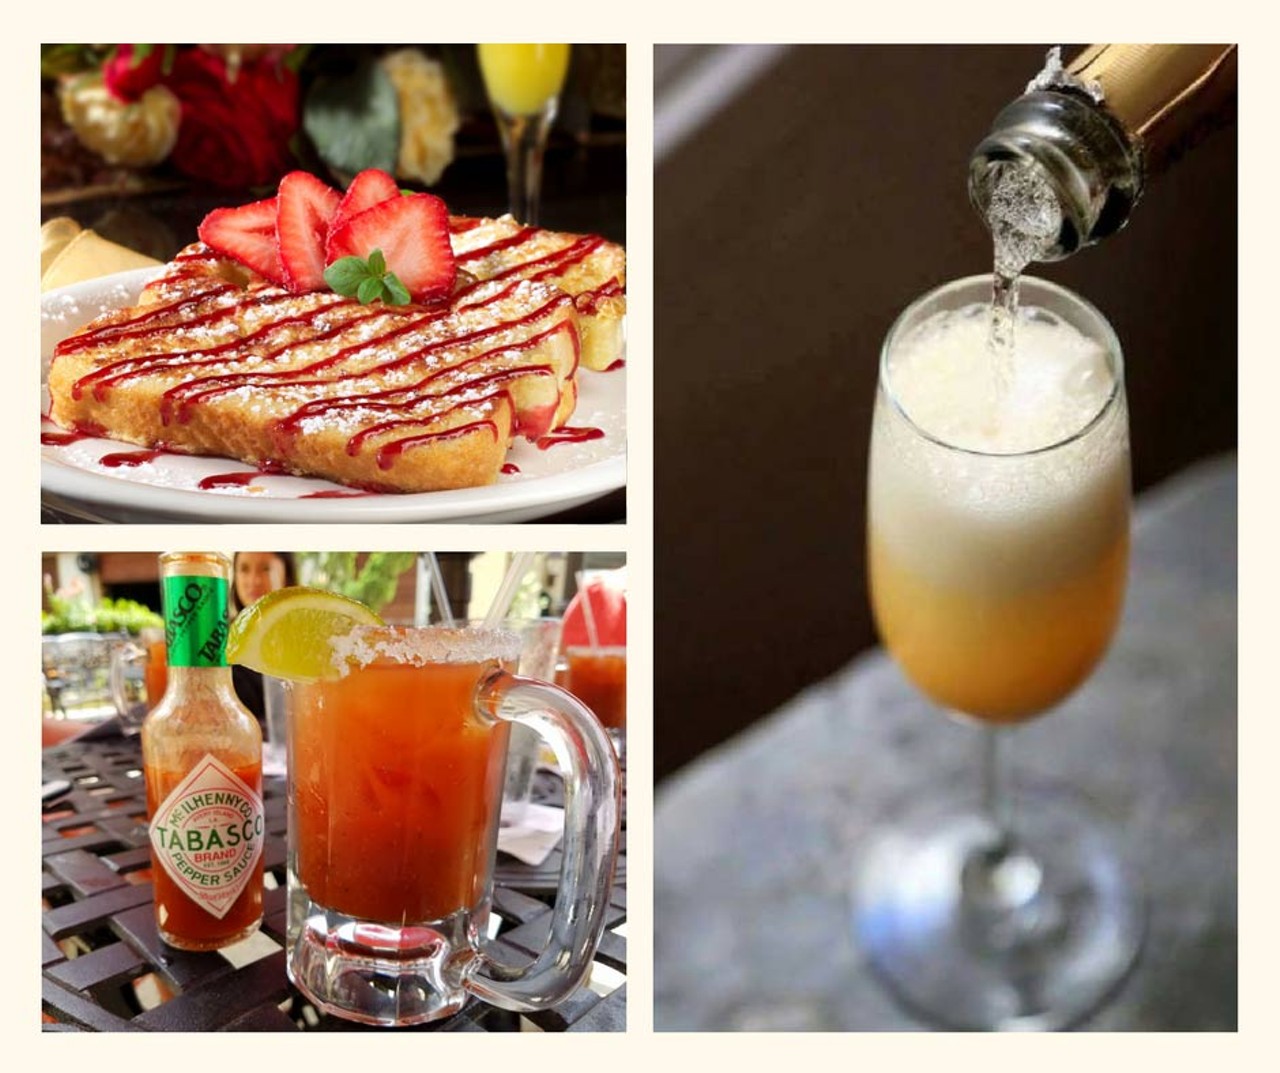 Refreshing $.99 Mimosas and Spicy $1.50 Bloody Marys to compliment the mouth-watering Brunch menu.  The full menu is also available!
Three Locations:
The Forum &#150; 8211 Agora Parkway &#150; 210.547.3000
Park North &#150; 842 NW Loop 410 &#150; 210.798.4154
The Rim &#150; 17627 La Cantera- 210.798.5466
www.thelionandrose.com